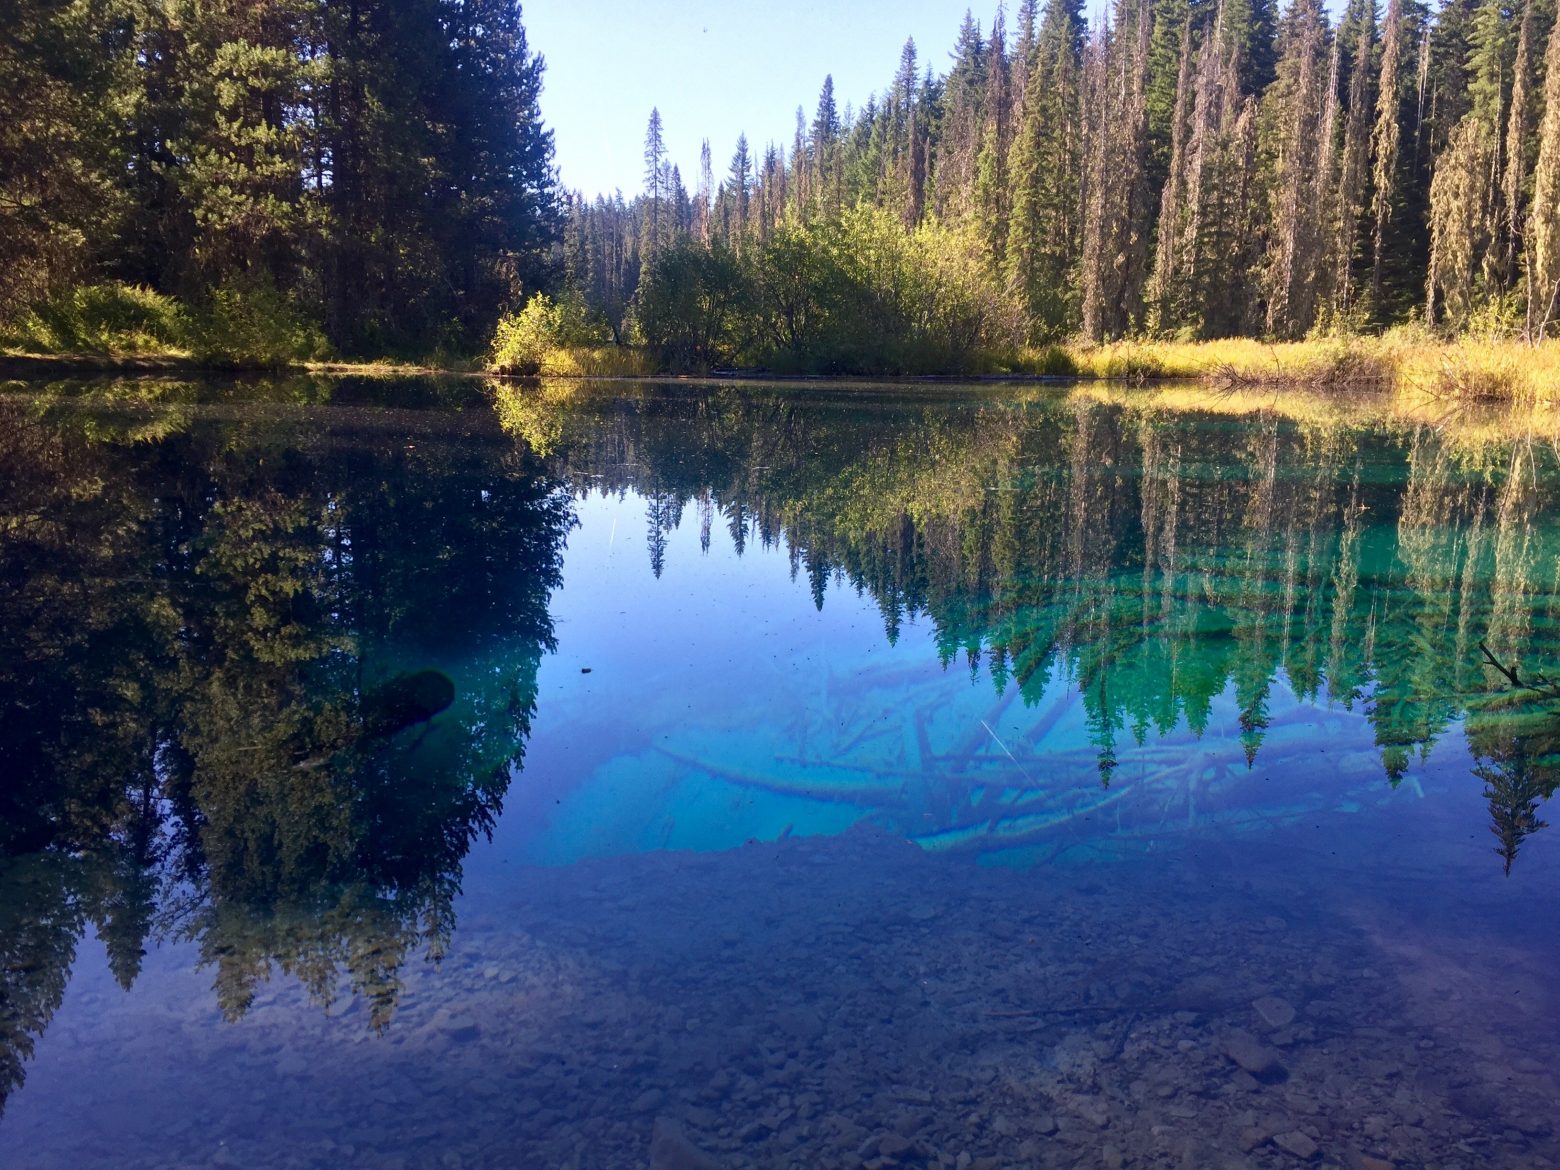 Deep blue and green water of Little Crater Lake